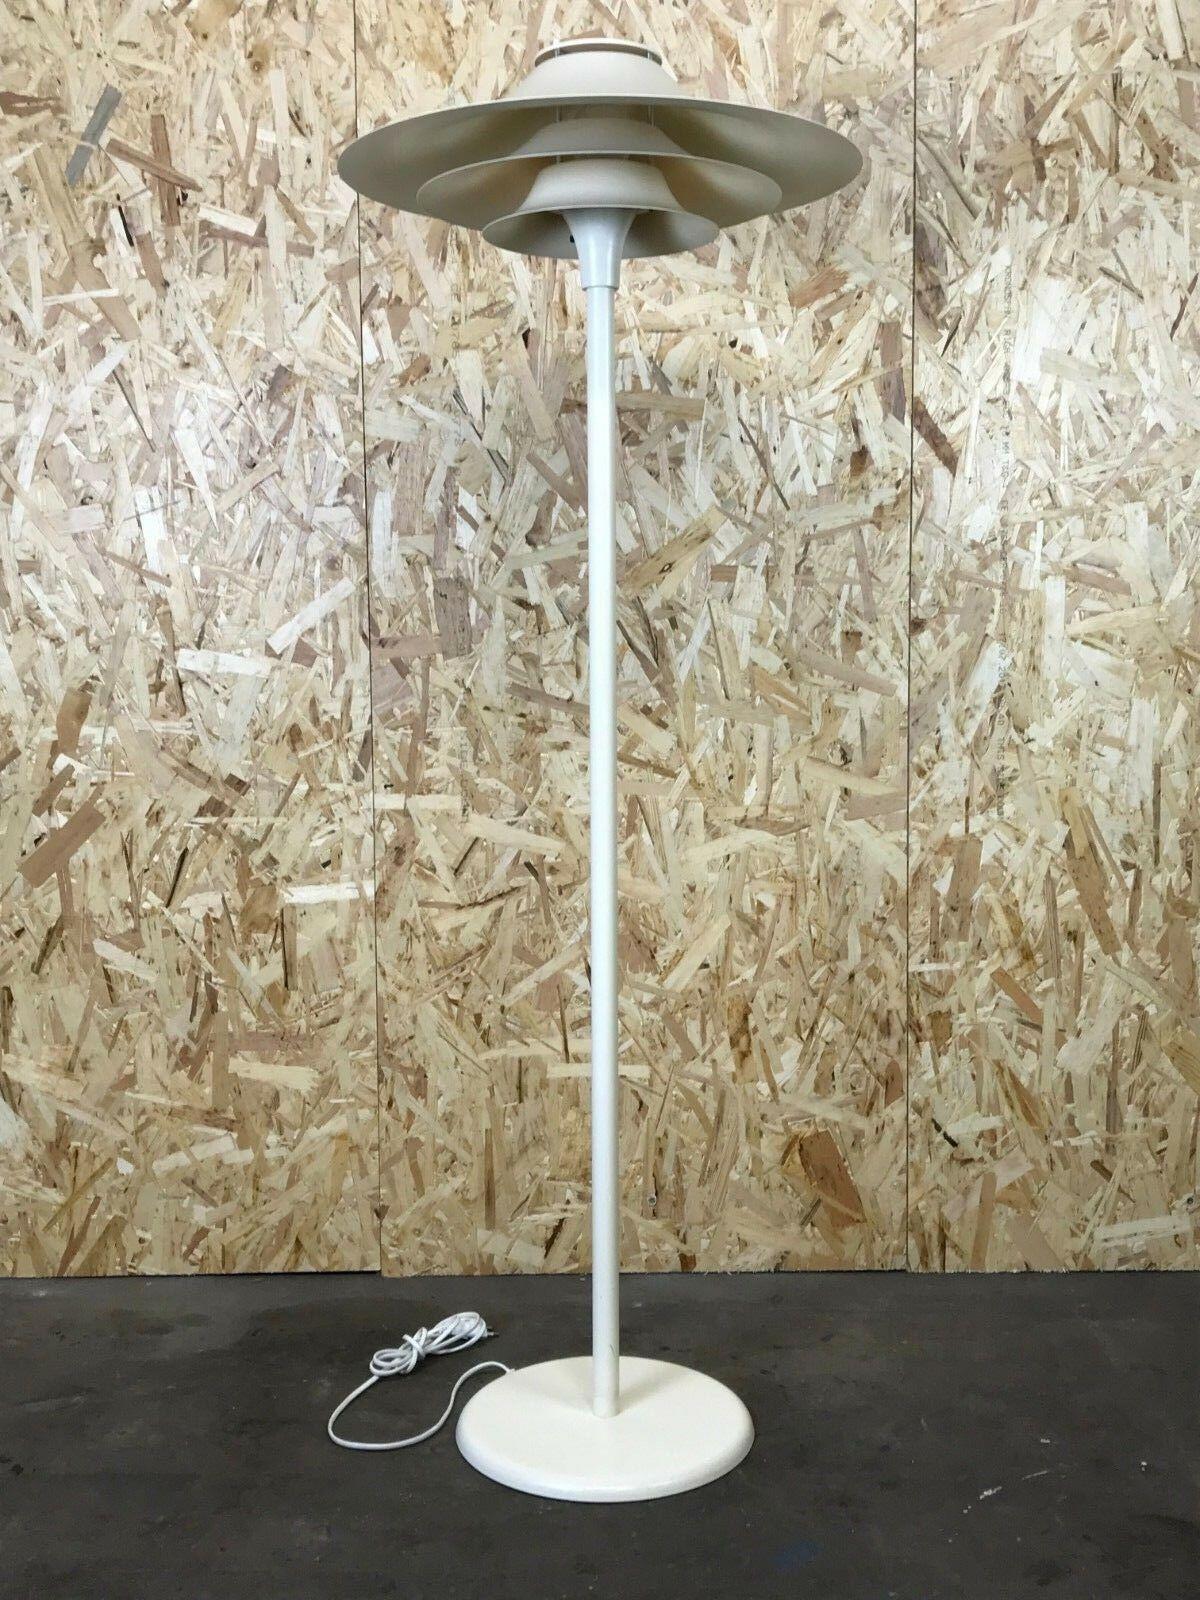 60s 70s floor lamp Lyfa Danish Modern Design Denmark 60s 70s

Object: floor lamp

Manufacturer: Lyfa

Condition: good

Age: around 1960-1970

Dimensions:

Diameter = 47cm
Height = 129cm

Other notes:

The pictures serve as part of